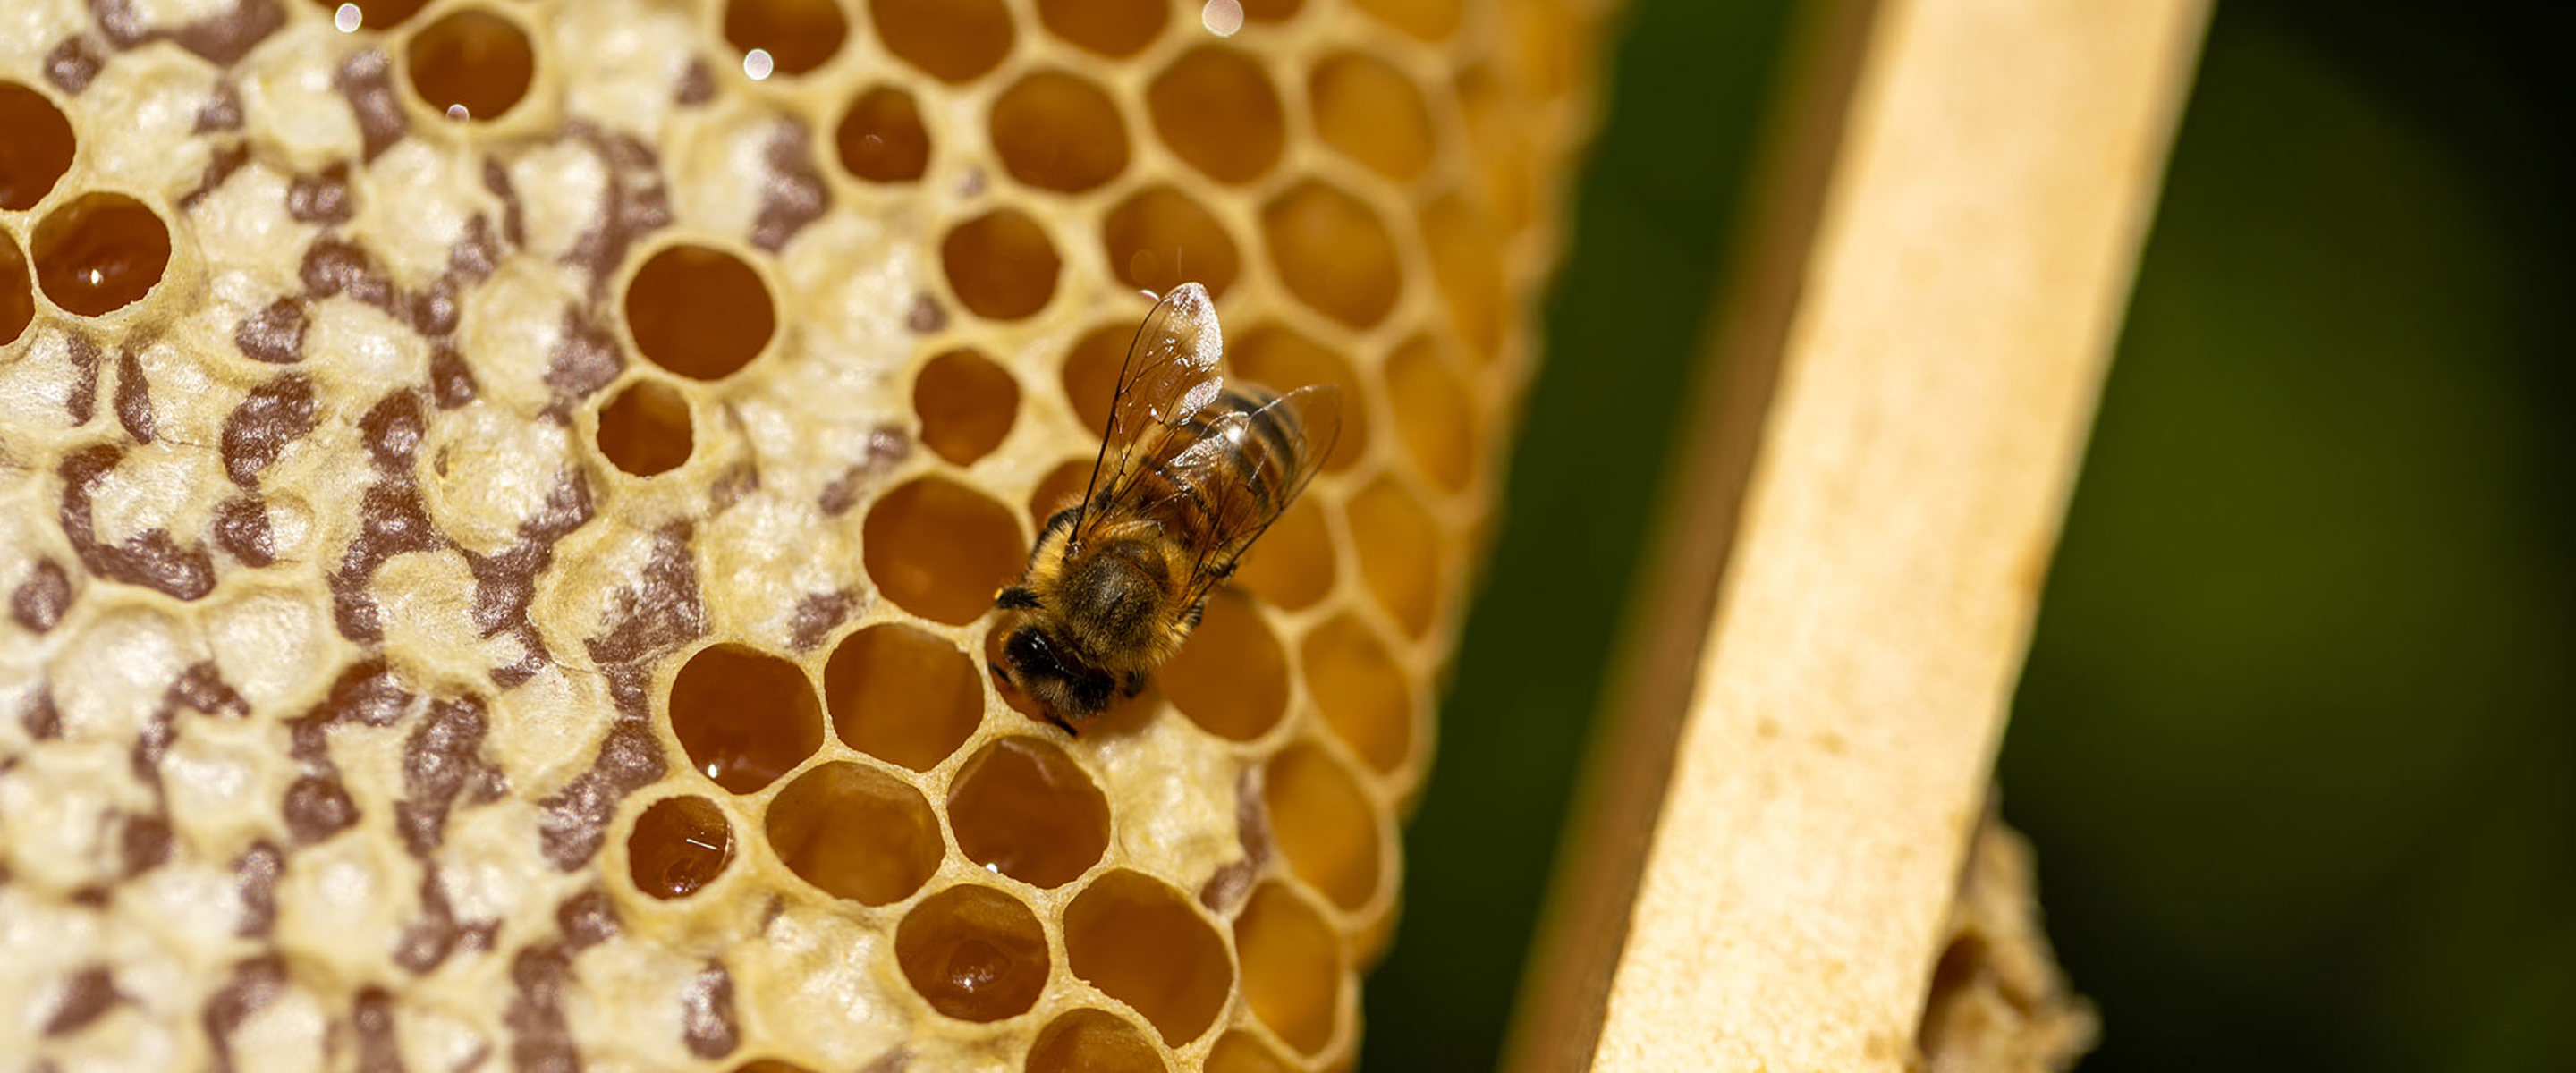 A photograph of a honey bee working in a hive with honey comb